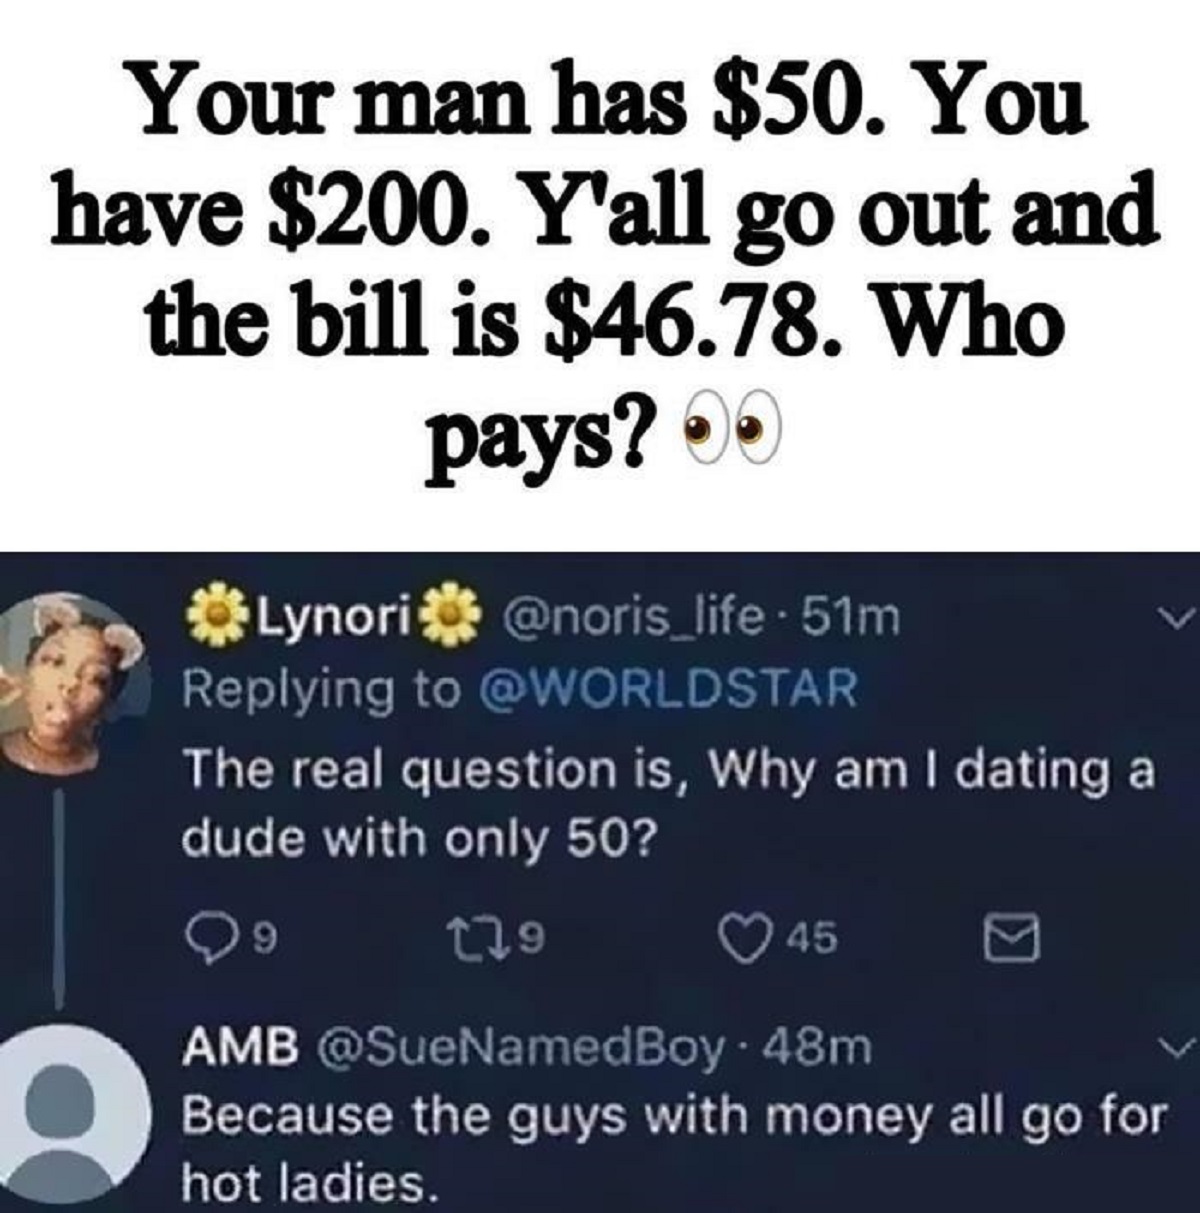 point - Your man has $50. You have $200. Y'all go out and the bill is $46.78. Who pays? Lynori 51m The real question is, Why am I dating a dude with only 50? 9 179 45 Amb Boy 48m Because the guys with money all go for hot ladies.